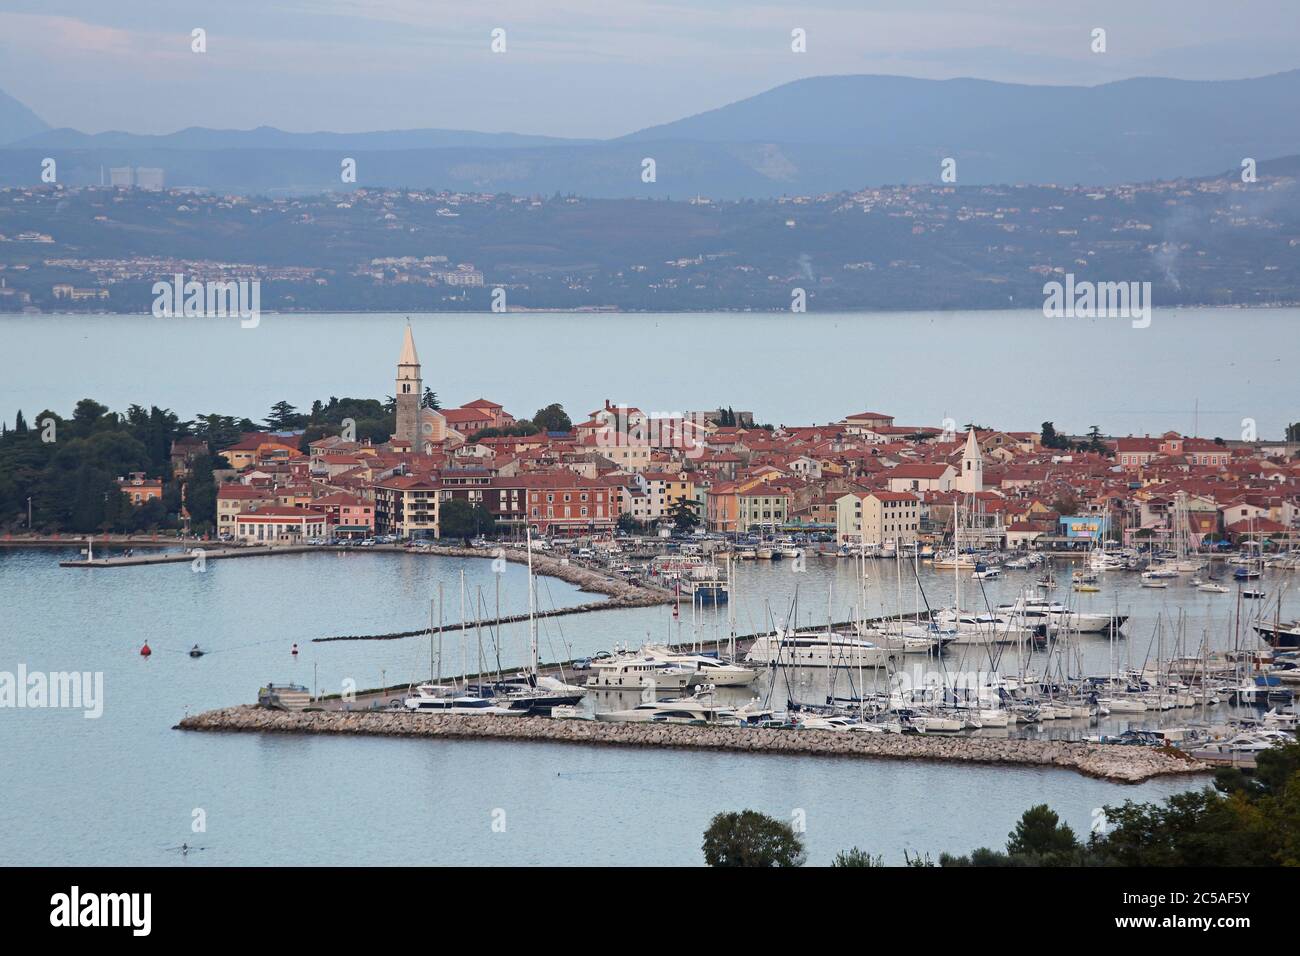 Izola, Slovenia - October 14, 2014: Aerial View of Seaside Town and Port for Yachts in Izola, Slovenia. Stock Photo